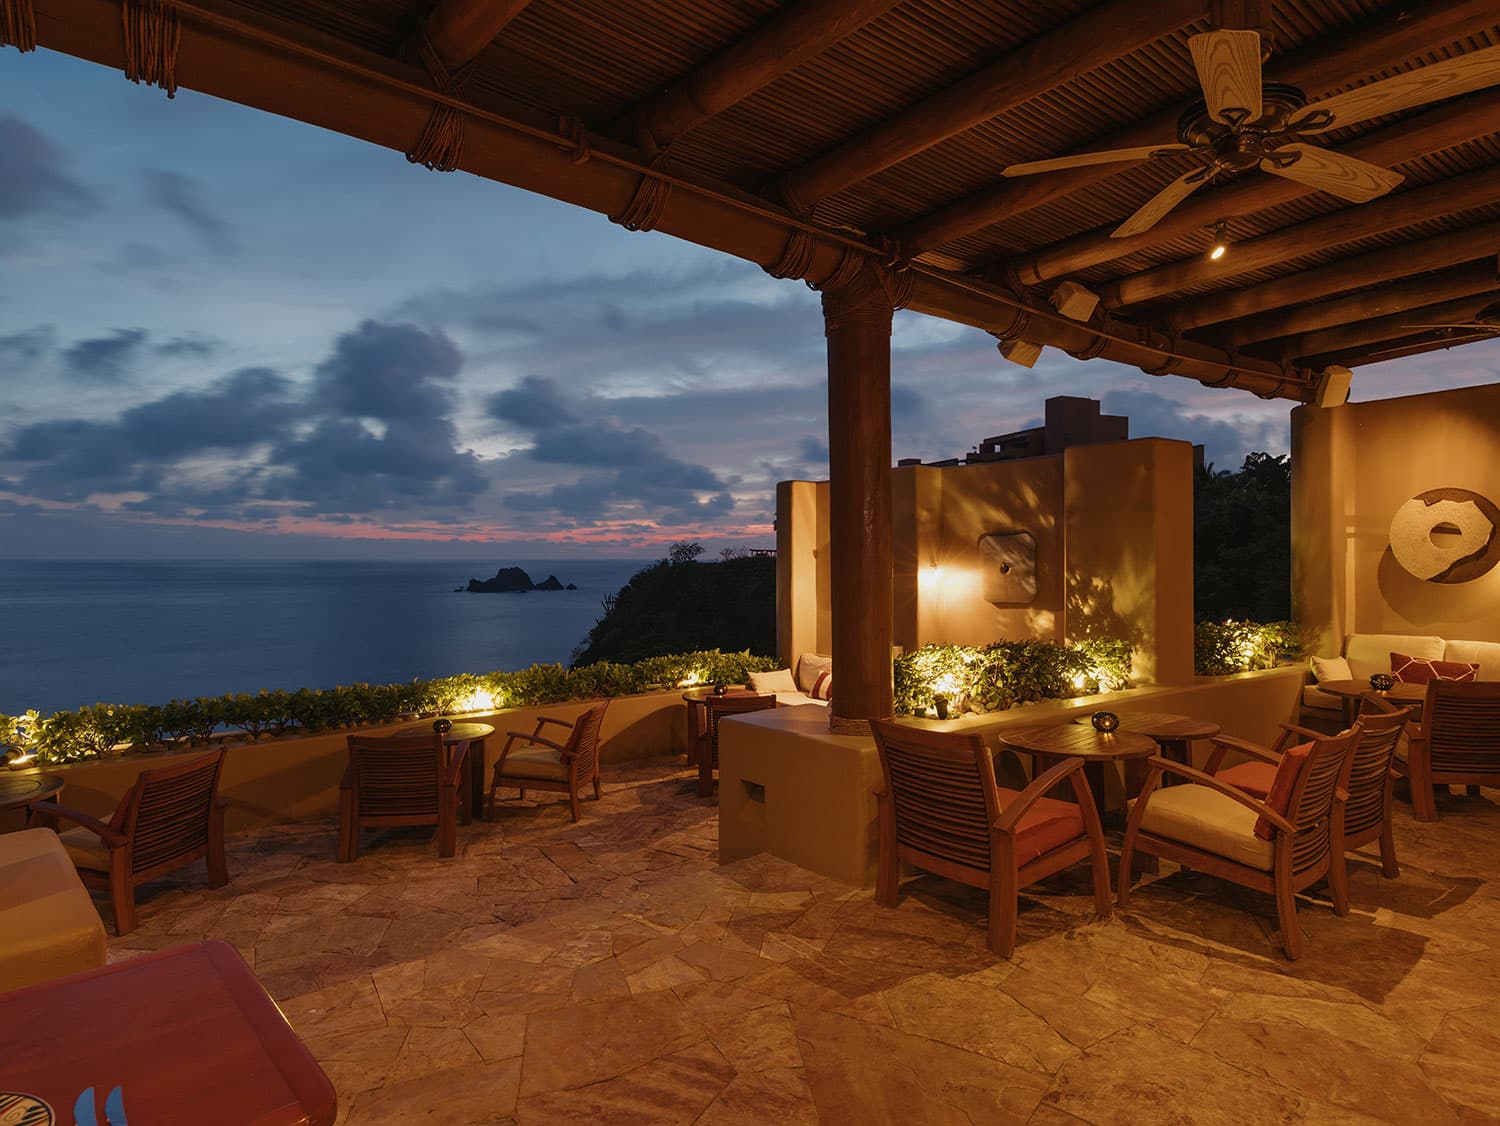 The Terrace Bar at Cala de Mar Resort and Spa in Mexico.